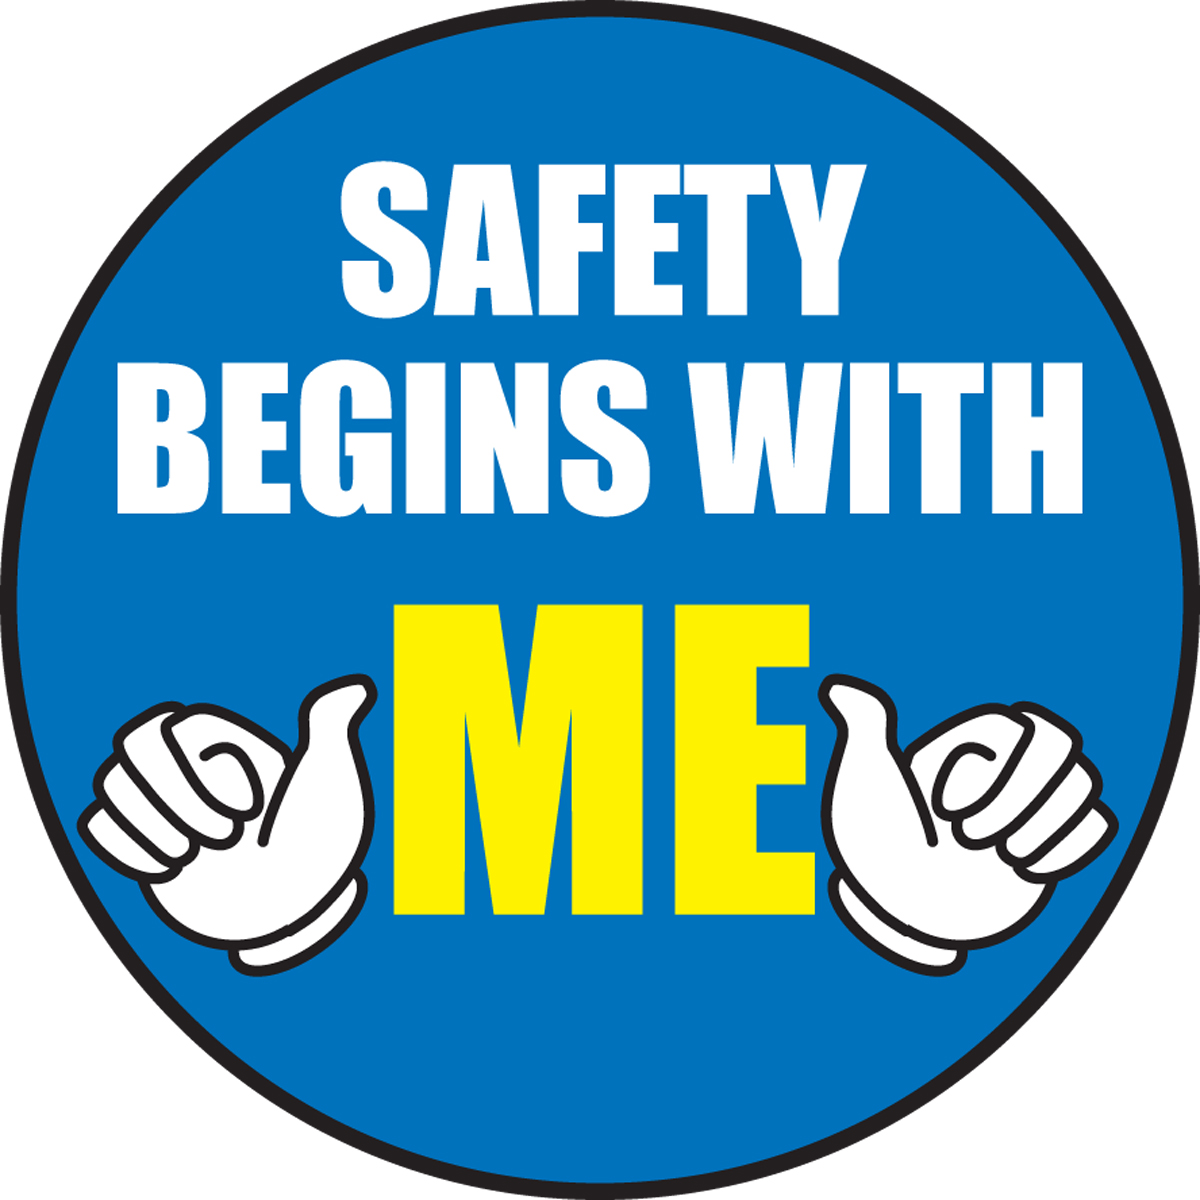 SAFETY BEGINS WITH ME